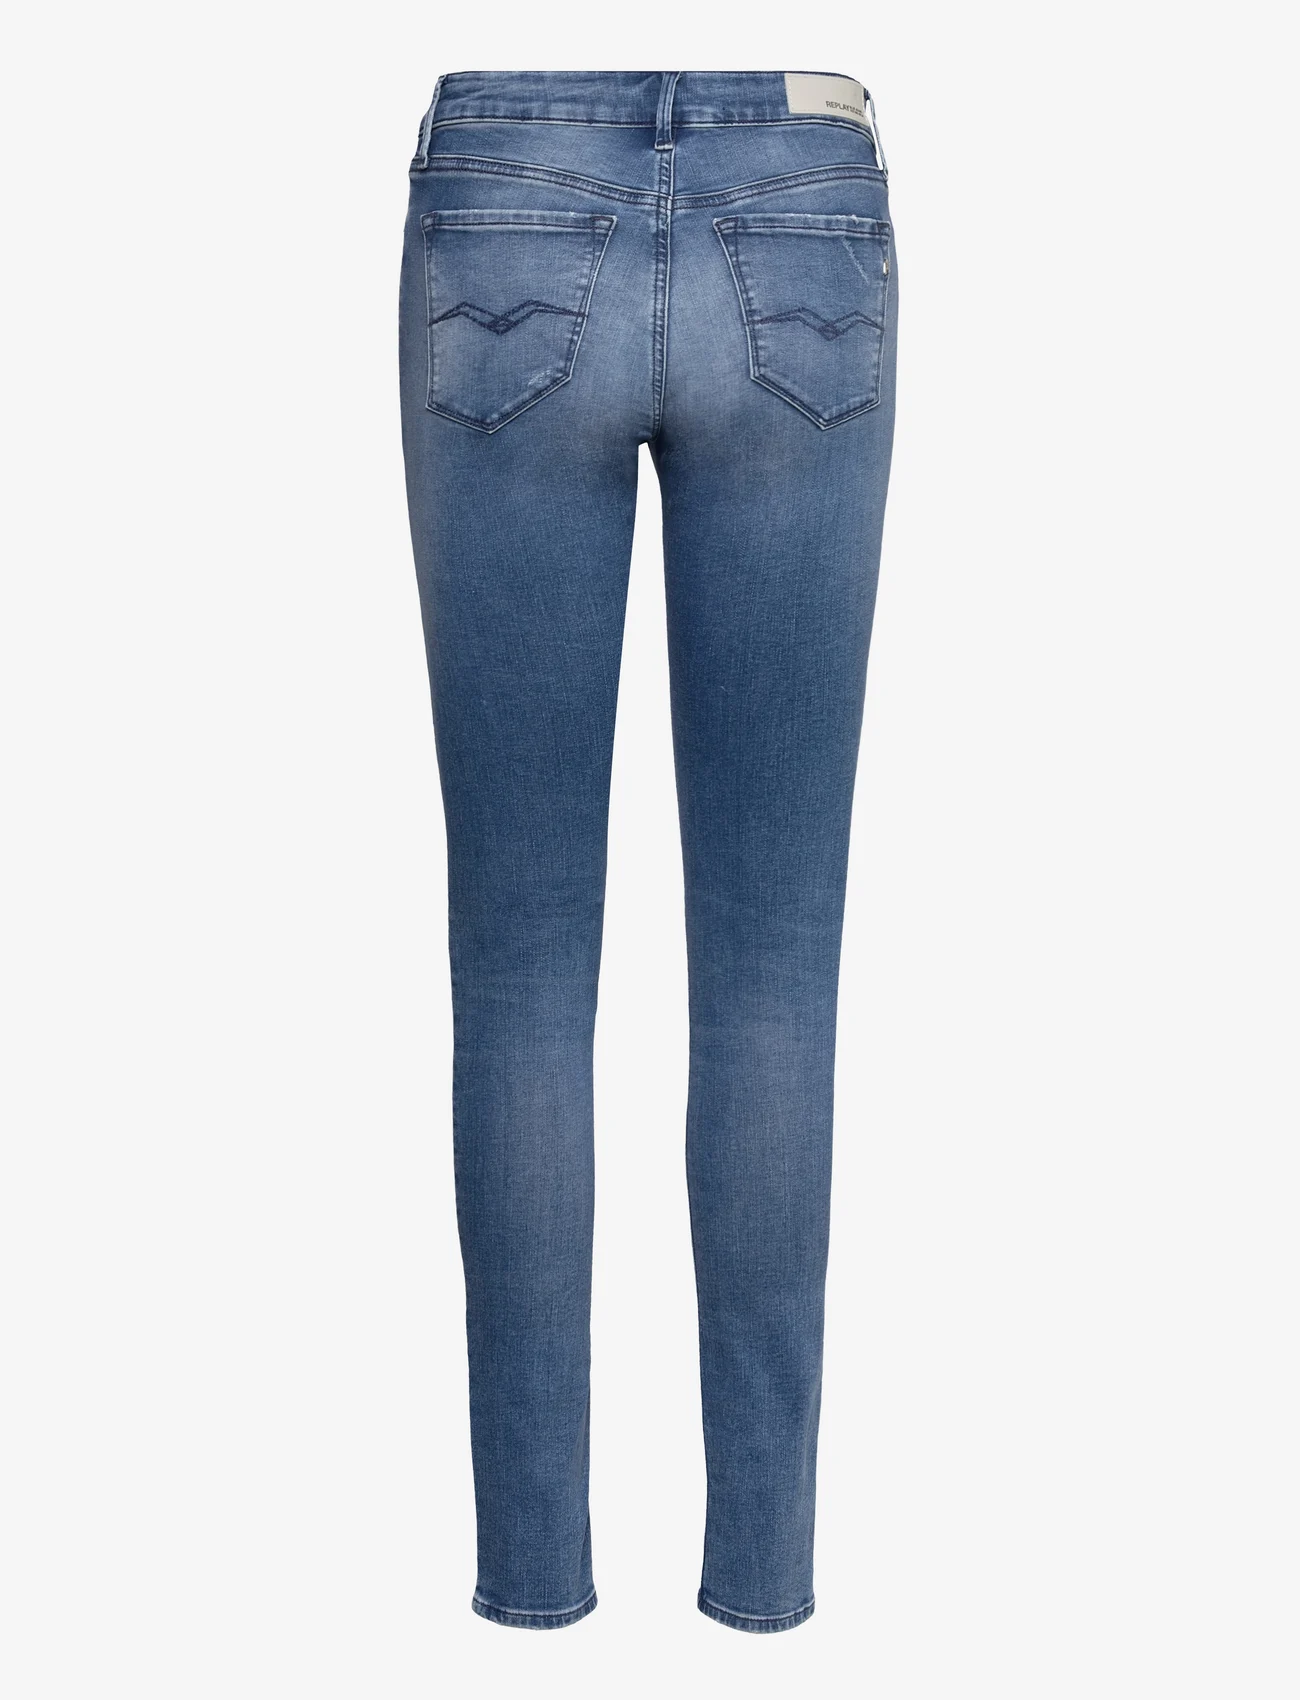 Replay - LUZIEN Trousers SKINNY HIGH WAIST - blue - 1